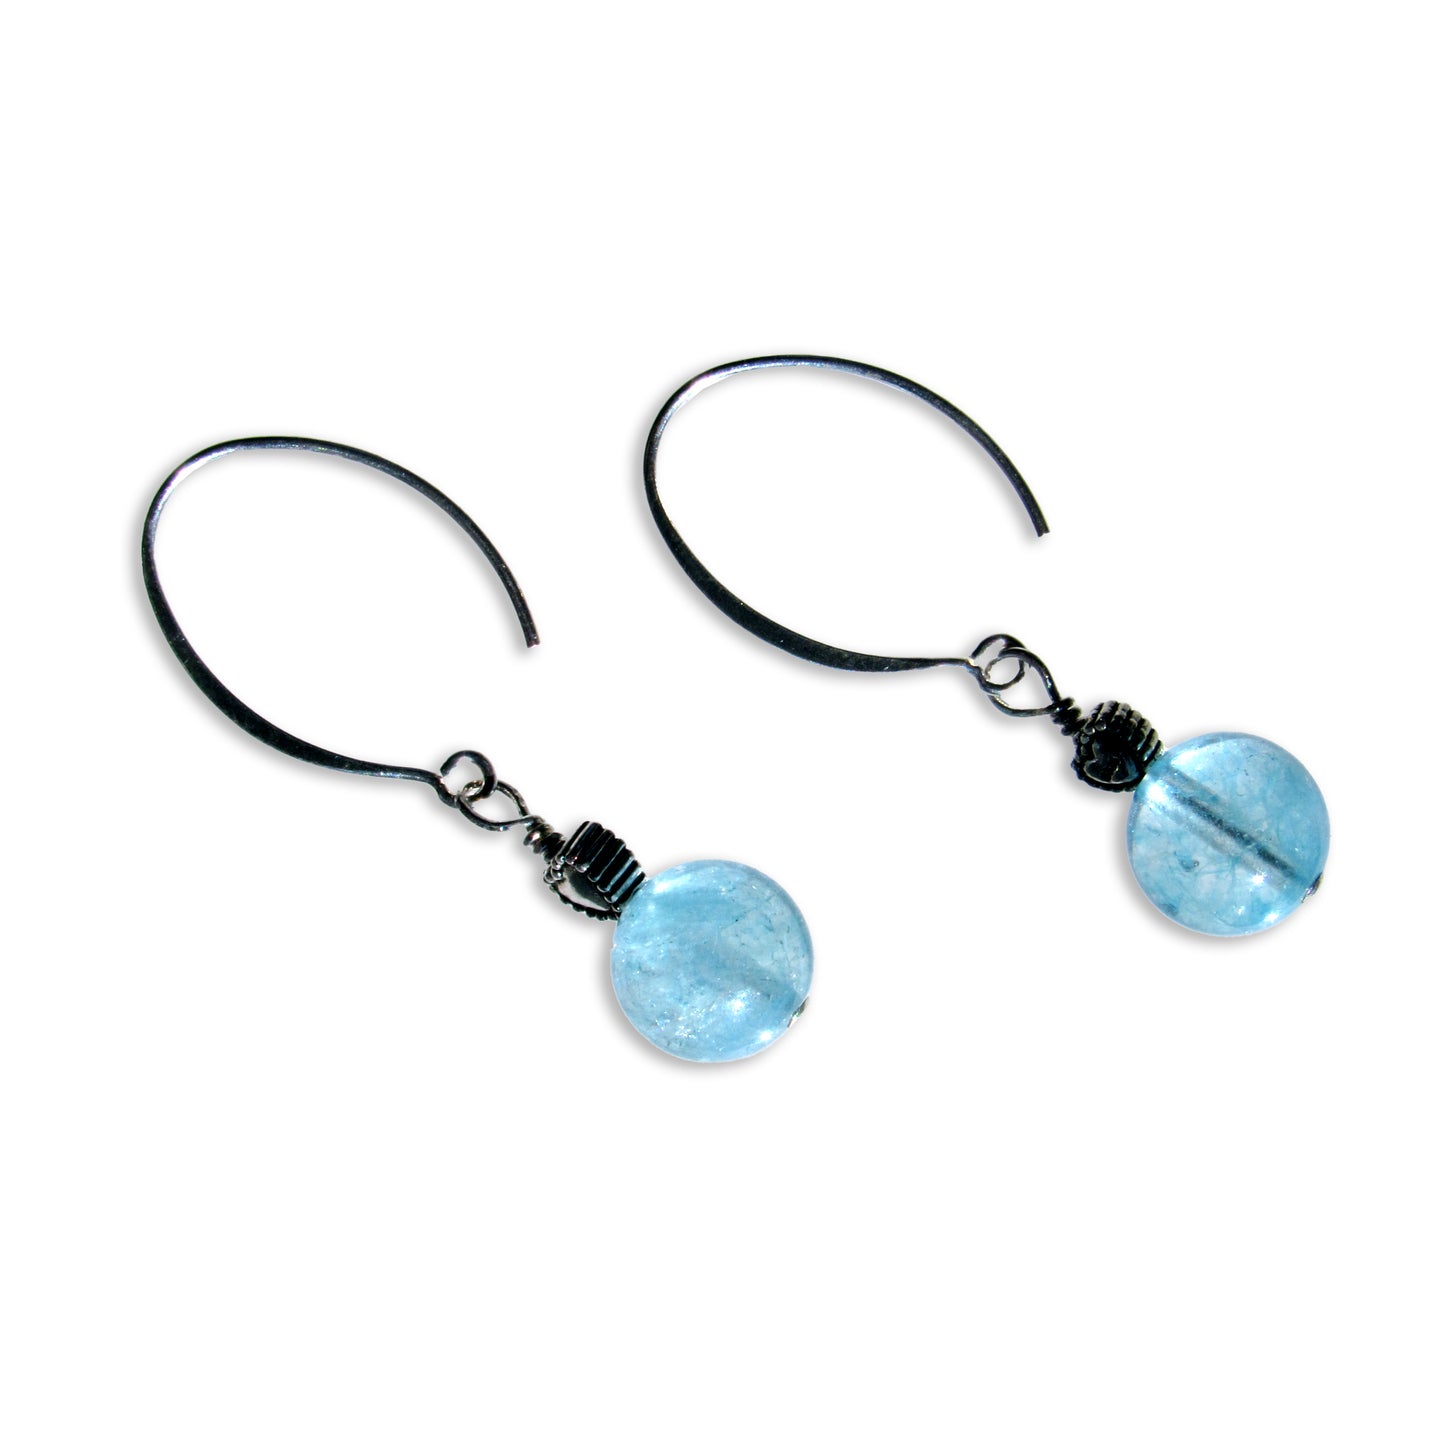 Aquamarine gemstone and Oxidized Sterling Silver Heart Earrings